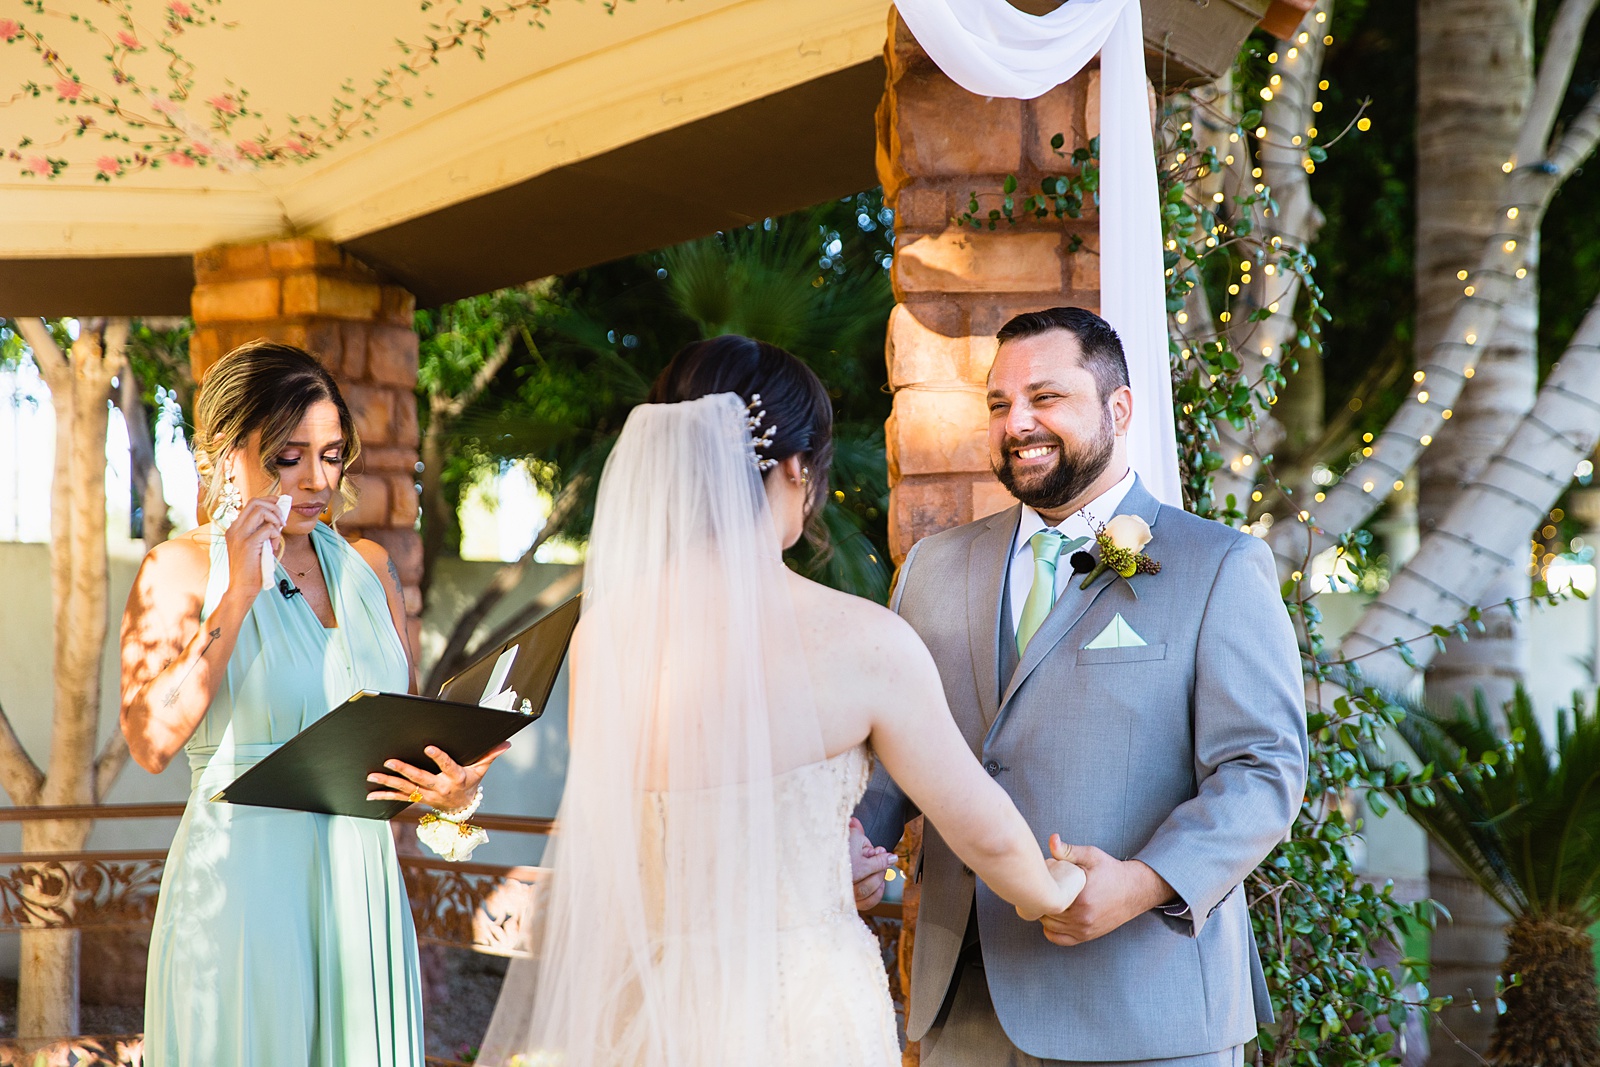 Groom looking at his bride during their wedding ceremony at Bella Rose Estate by Chandler wedding photographer PMA Photography.